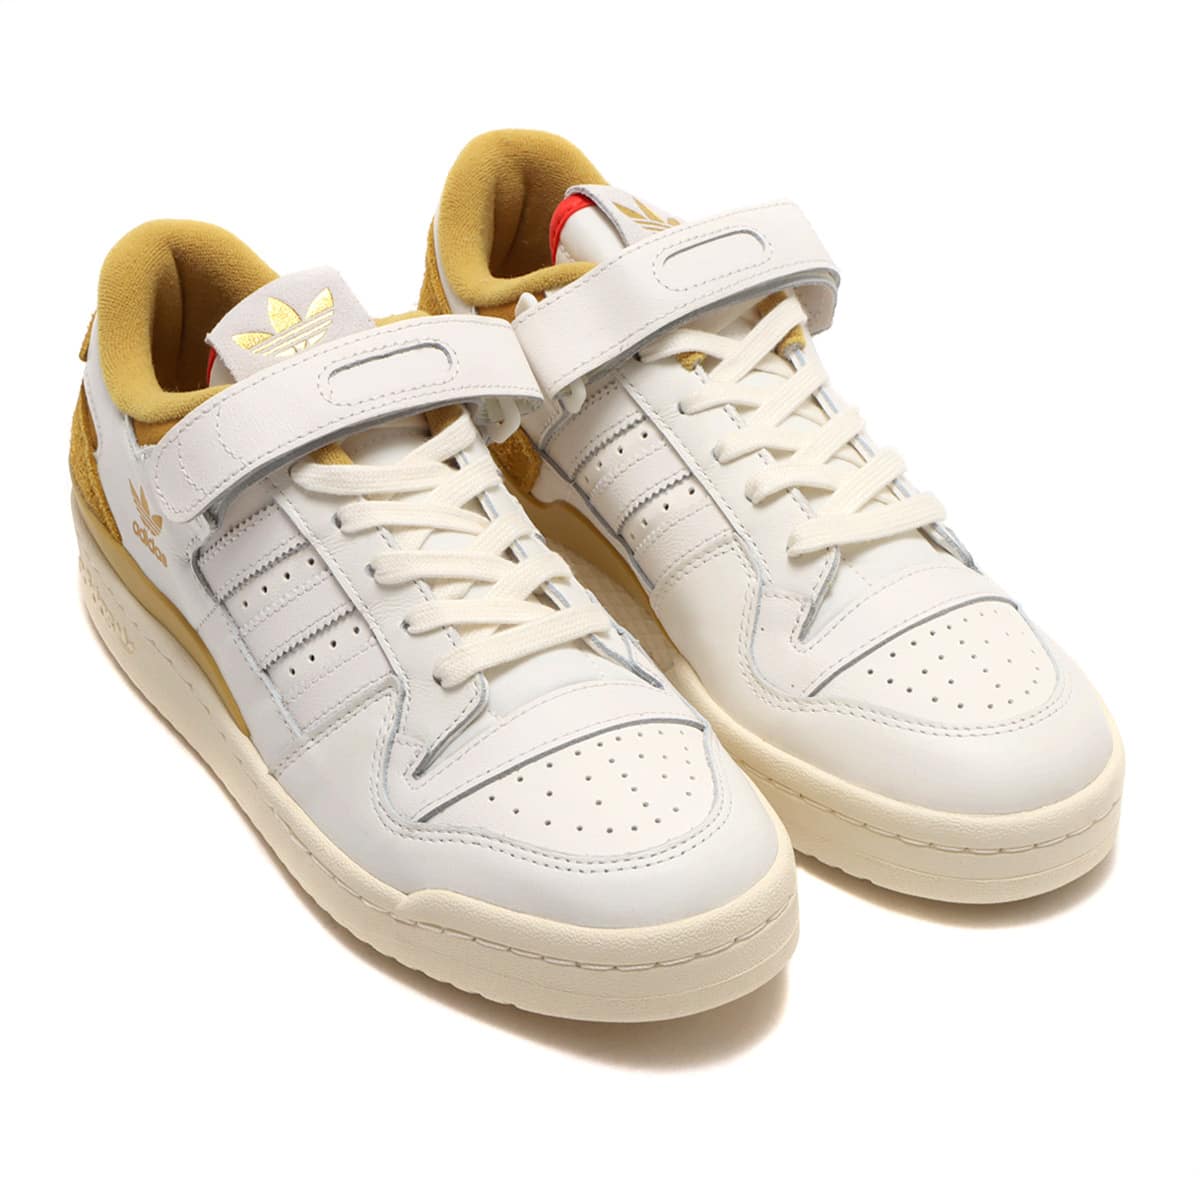 adidas FORUM 84 LOW CREAM WHITE/VICTORY GOLD/RED 21FW-S